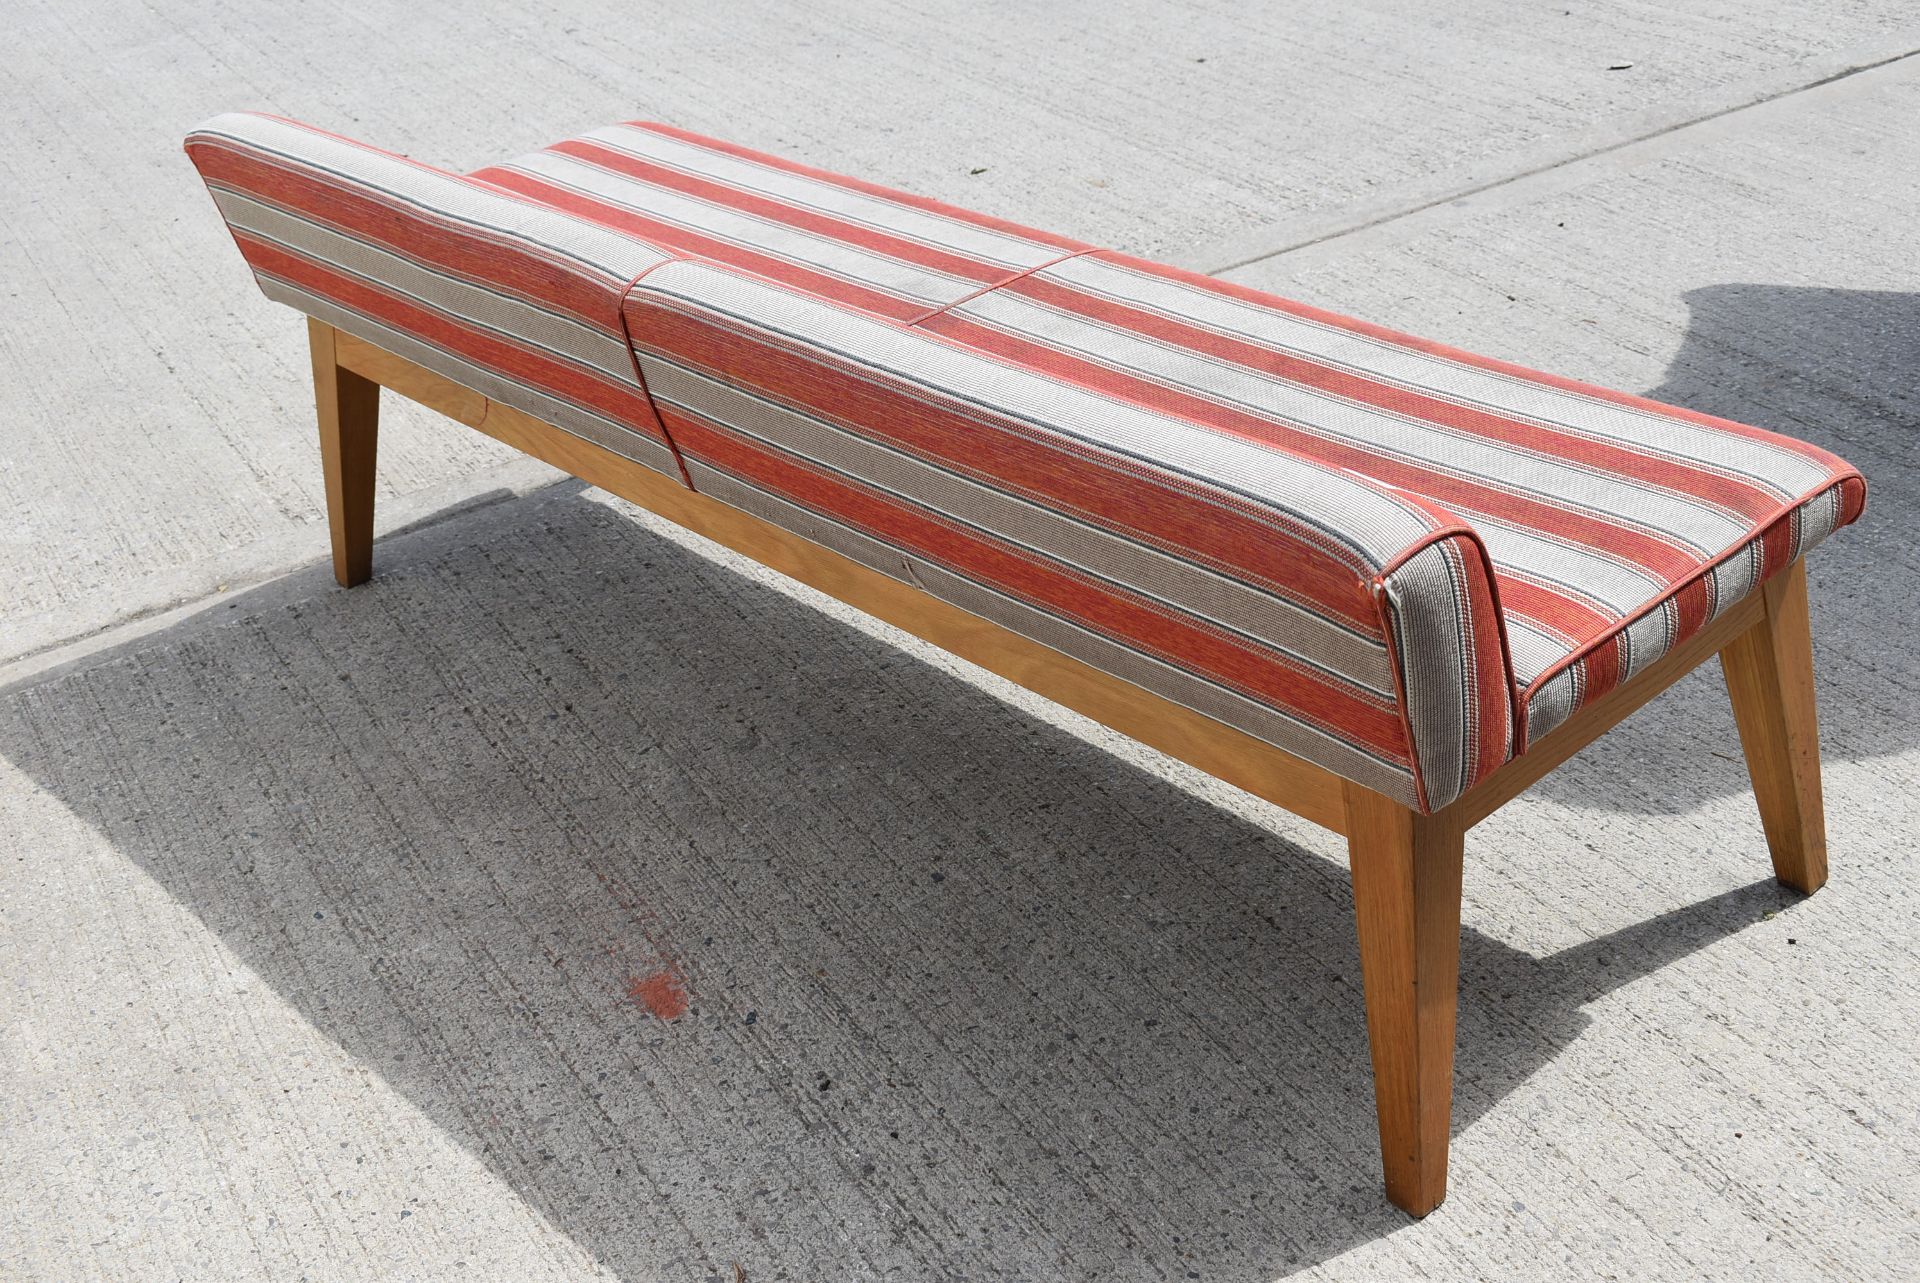 1 x Seating Bench With Solid Wood Bases and Hard Wearing Fabric Seats - Dimensions: H x W x D - Image 6 of 7